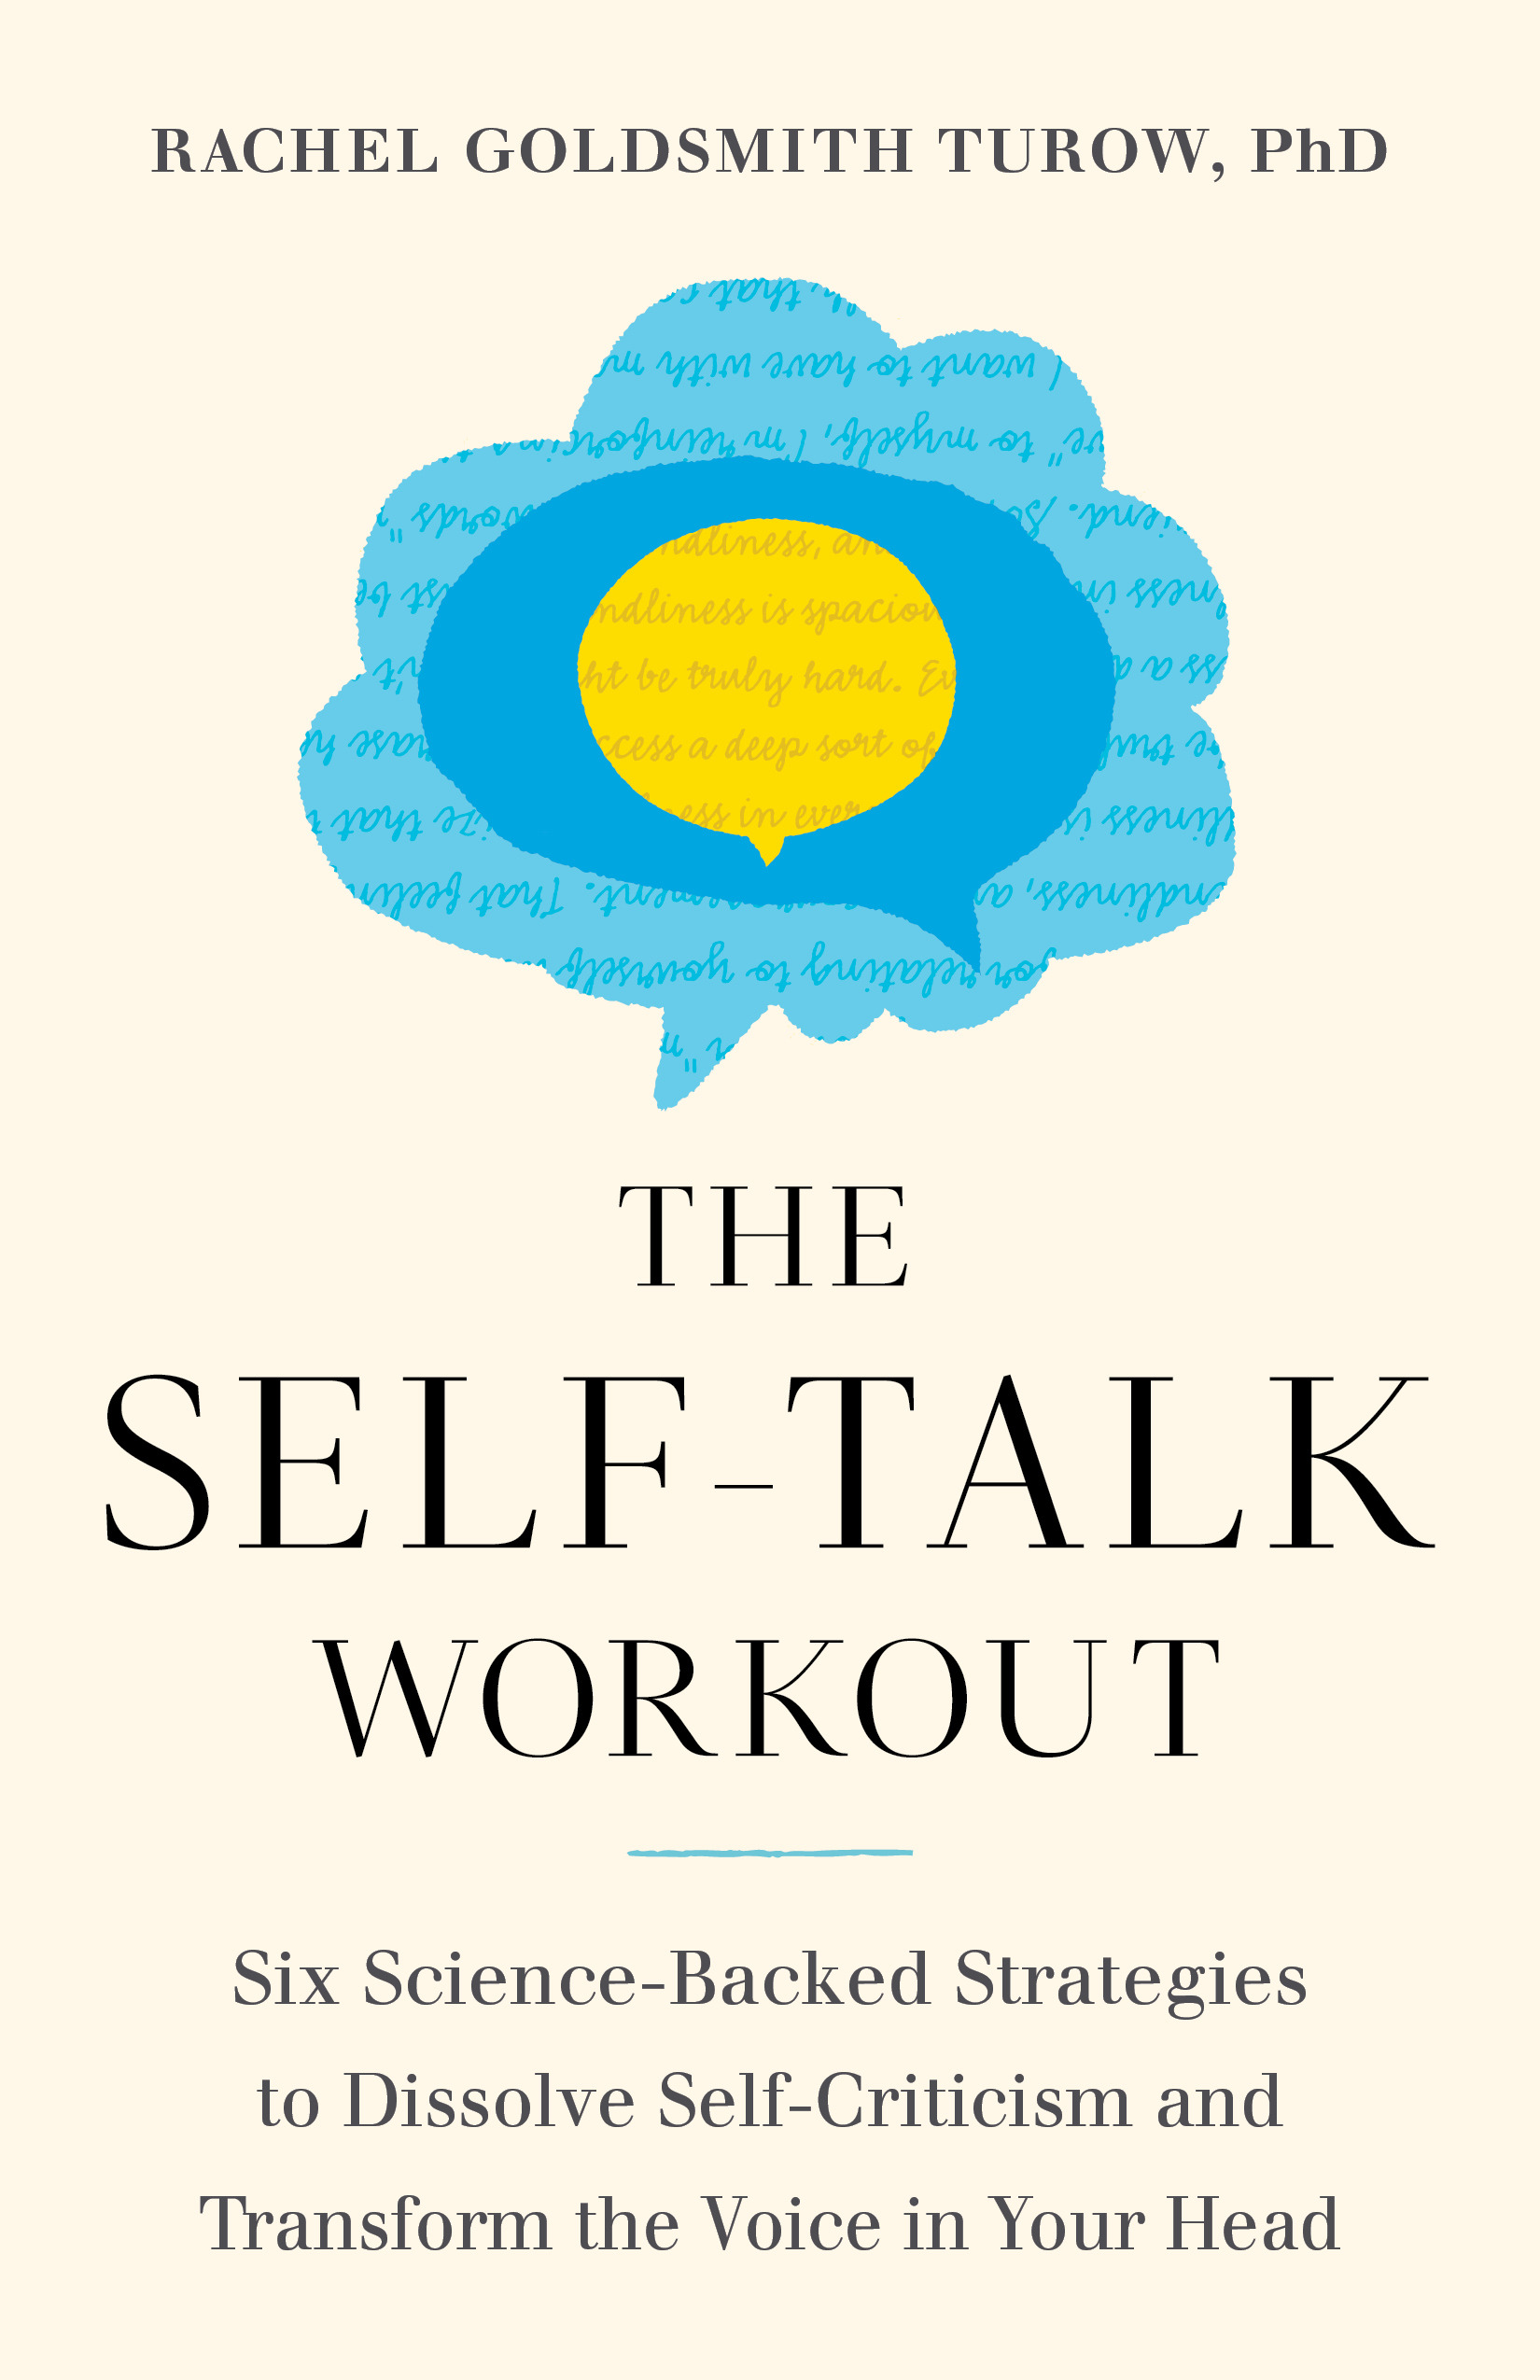 The Self-Talk Workout : Six Science-Backed Strategies to Dissolve Self-Criticism and Transform the Voice in Your Head | Psychology & Self-Improvement